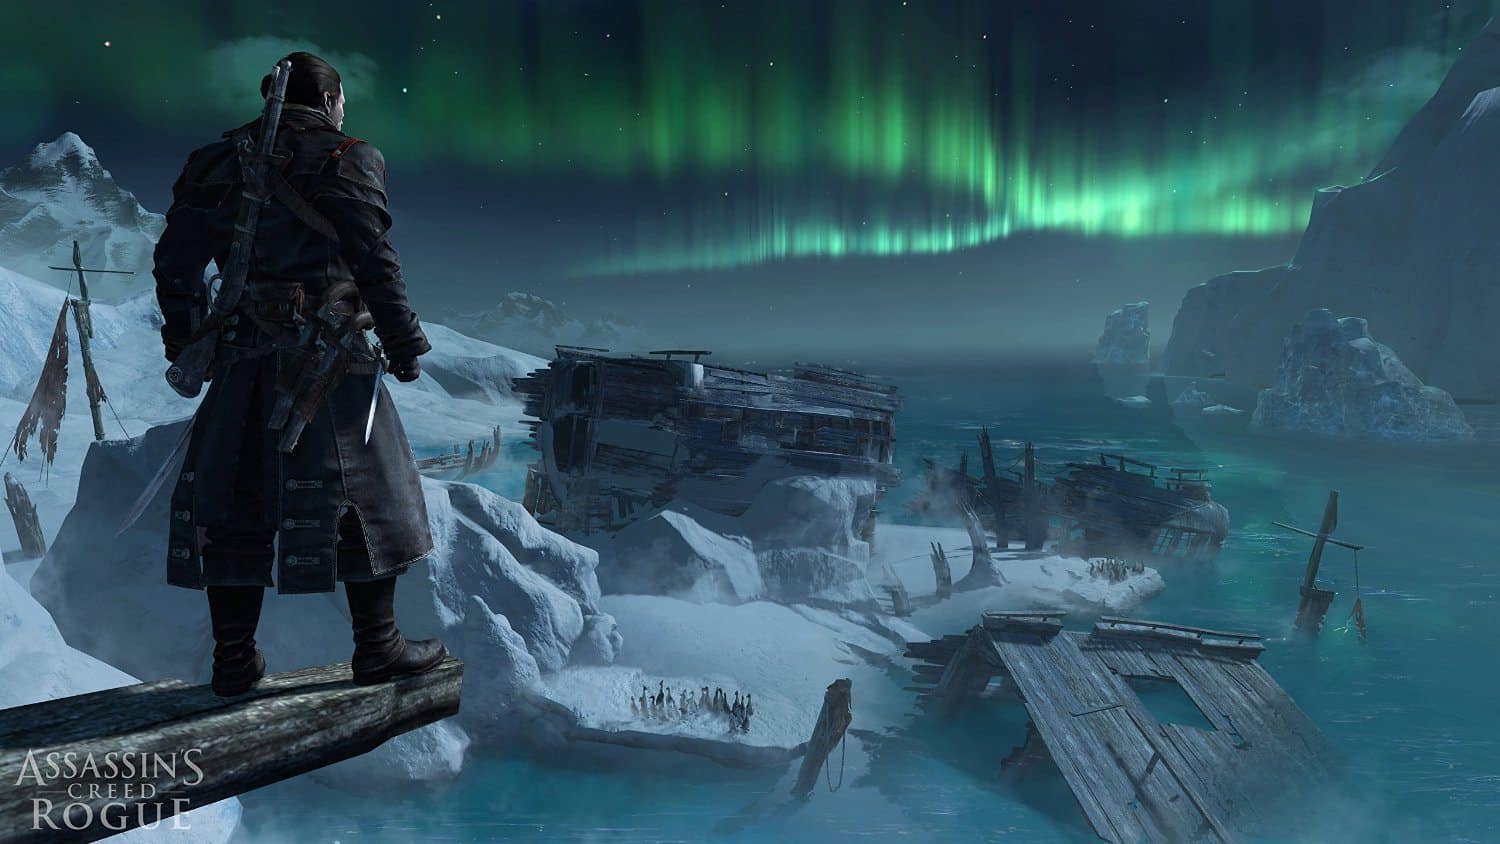 Game Review: Assassins Creed Rogue (Xbox 360)